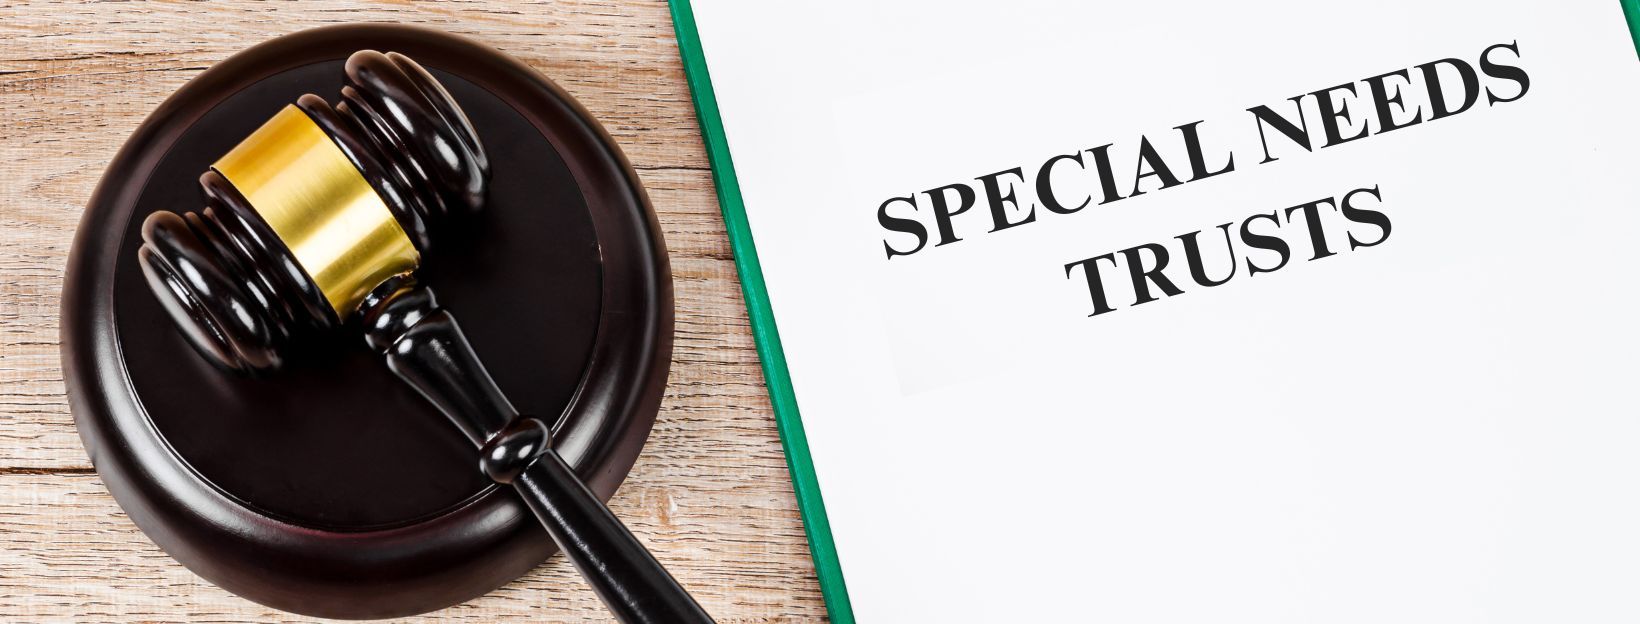 An Overview of Special Needs Trusts